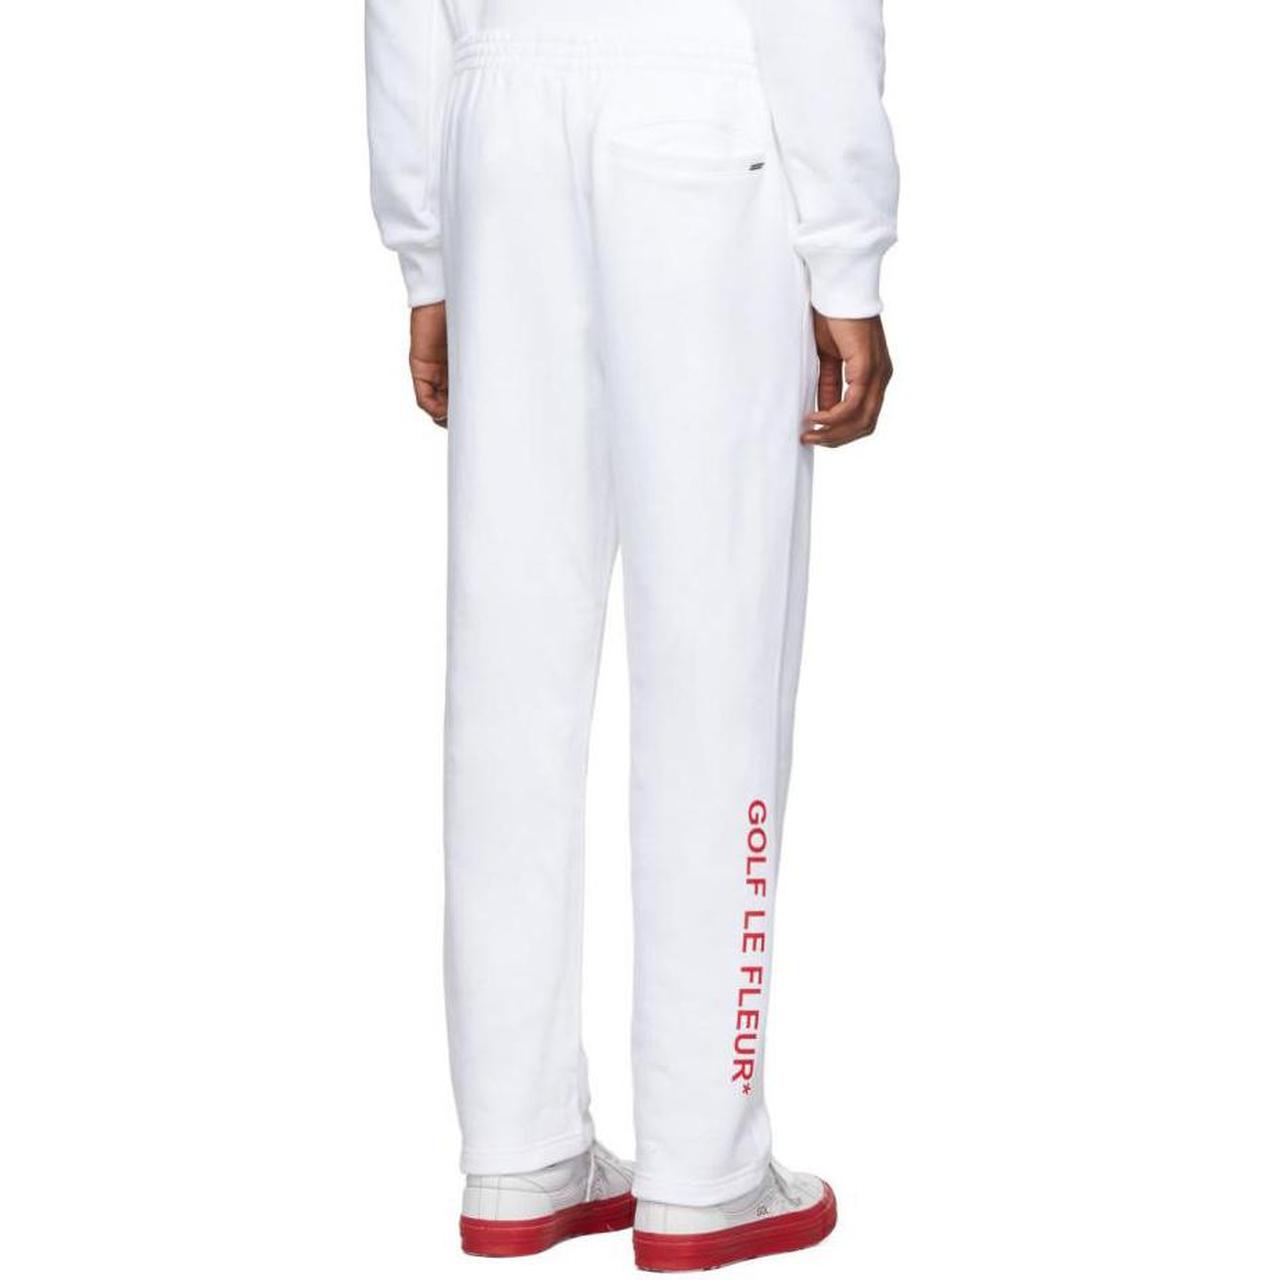 Converse Men's White and Red Joggers-tracksuits (3)